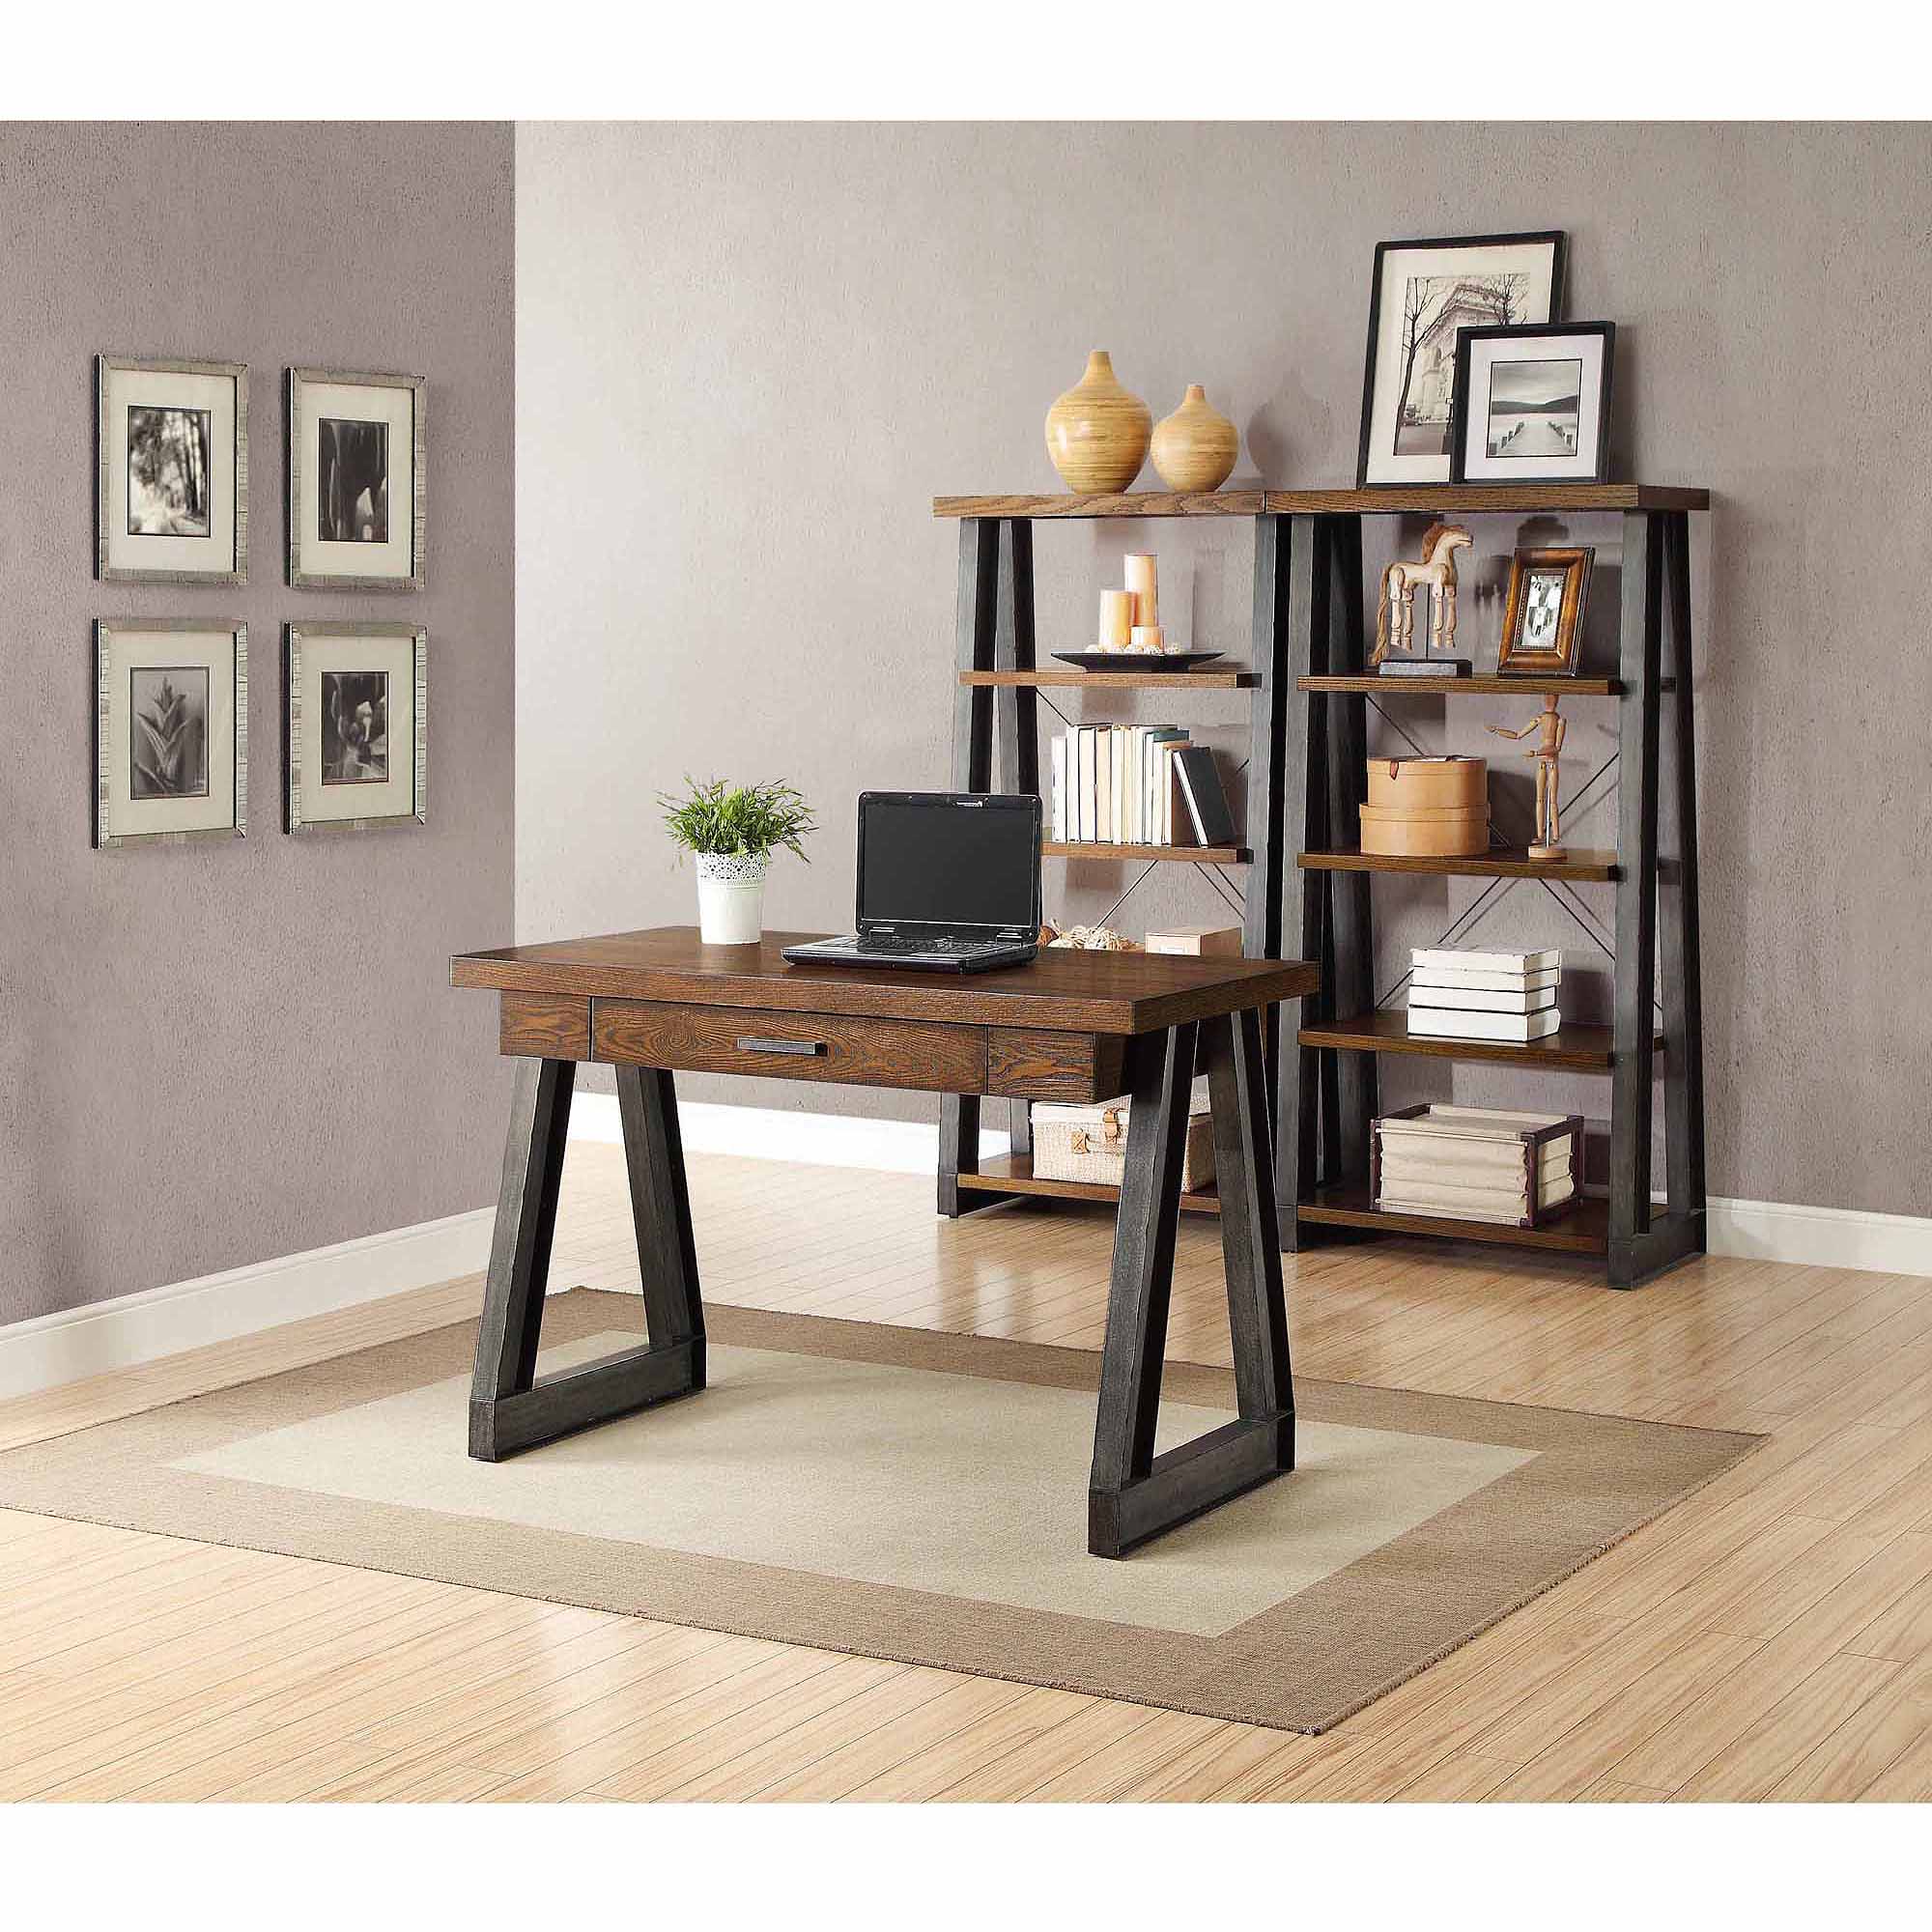 Better Homes & Gardens Mercer Industrial Writing Desk with Center Drawer, Brown Finish - image 3 of 3